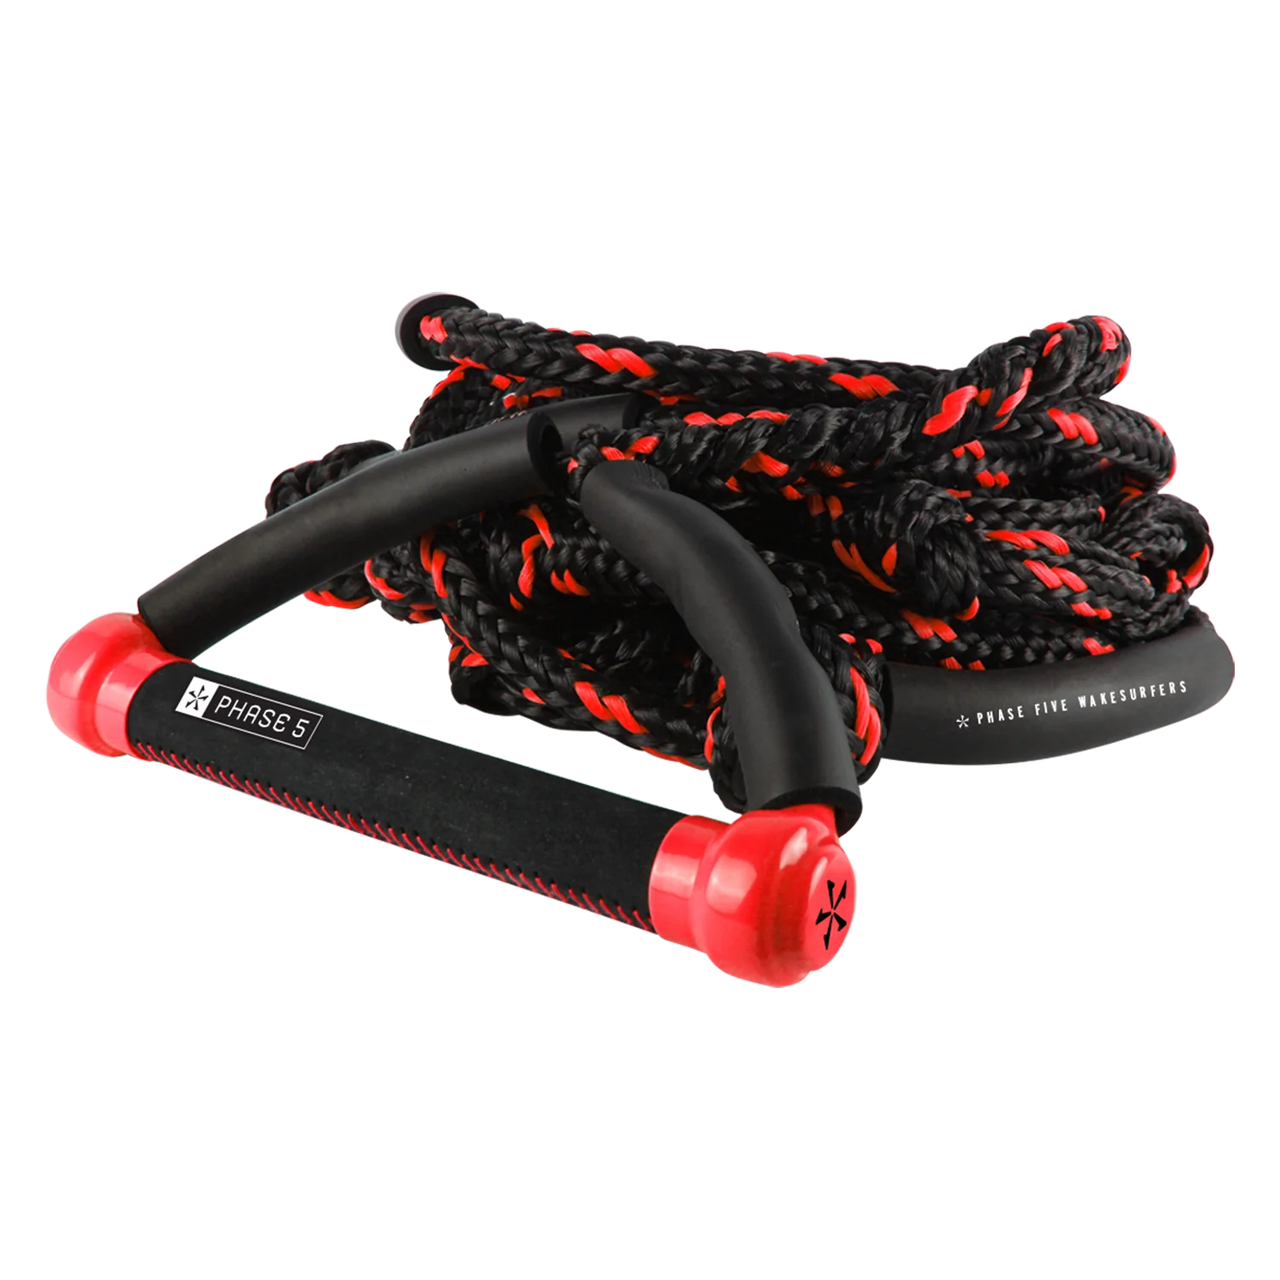 Phase 5 Pro Surf Tow Rope